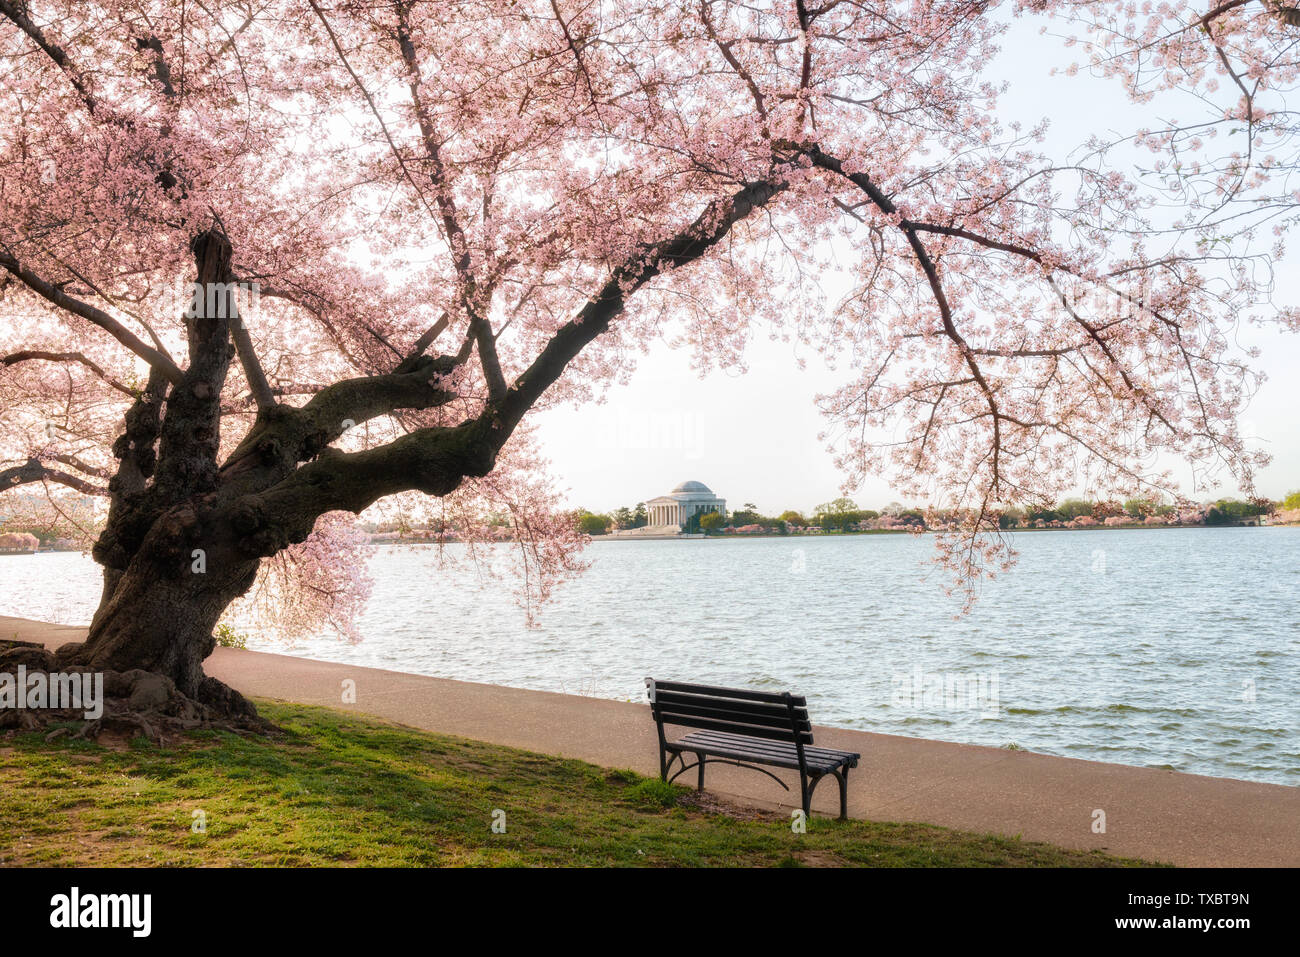 The beautiful cherry blossoms bloom every year on the banks of the tidal  lake, sitting under the cherry blossom tree overlooking the Jefferson  Memorial on the other side, which is more comfortable